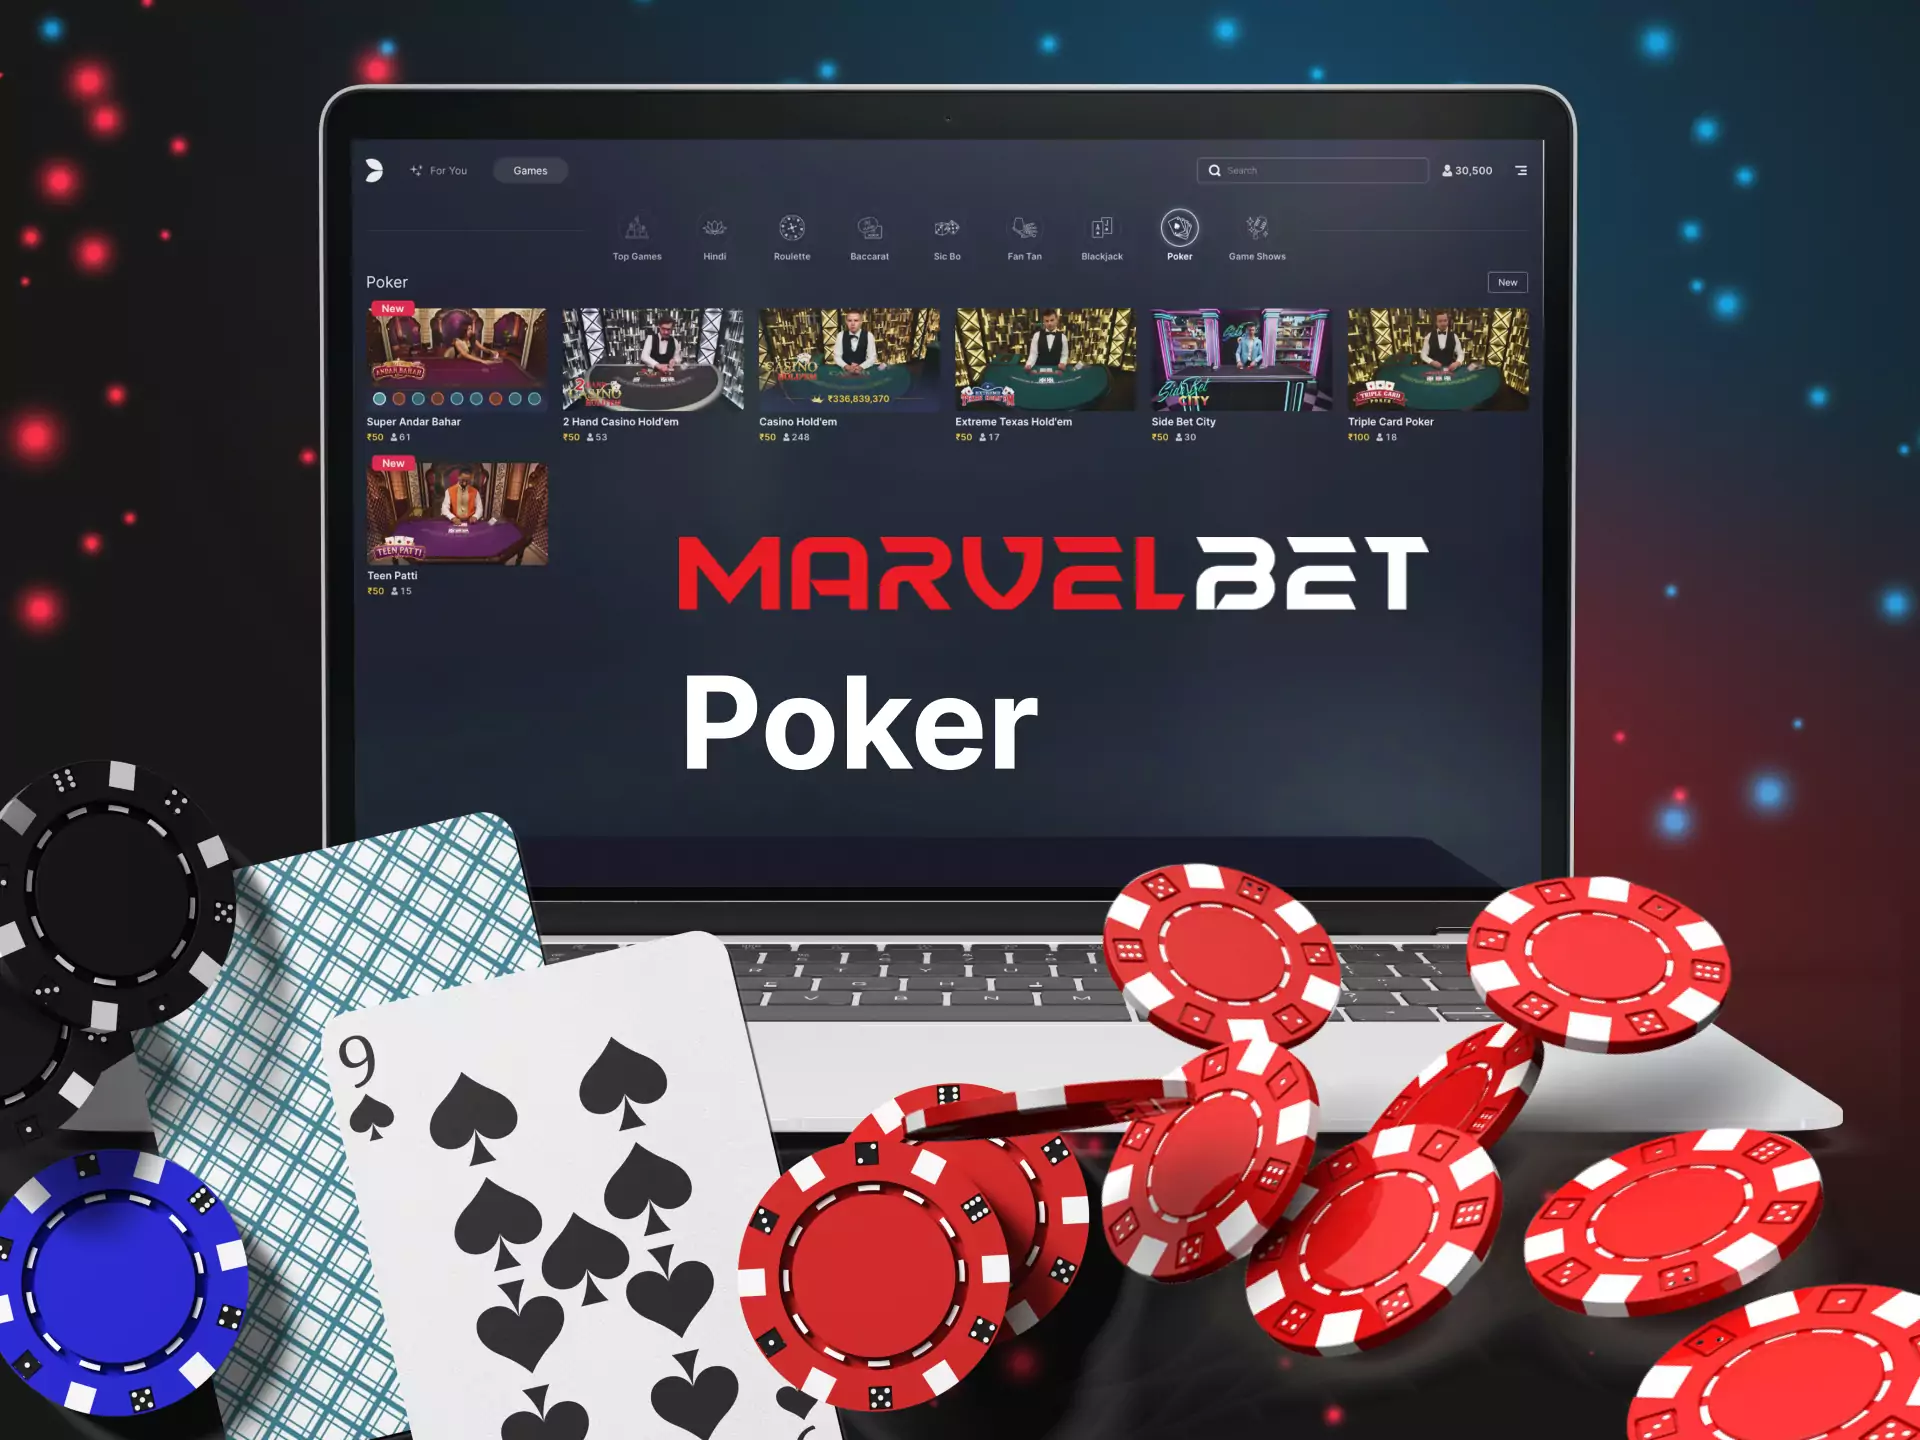 Poker is a worldwide card game that always can be played in the Marvelbet Casino.